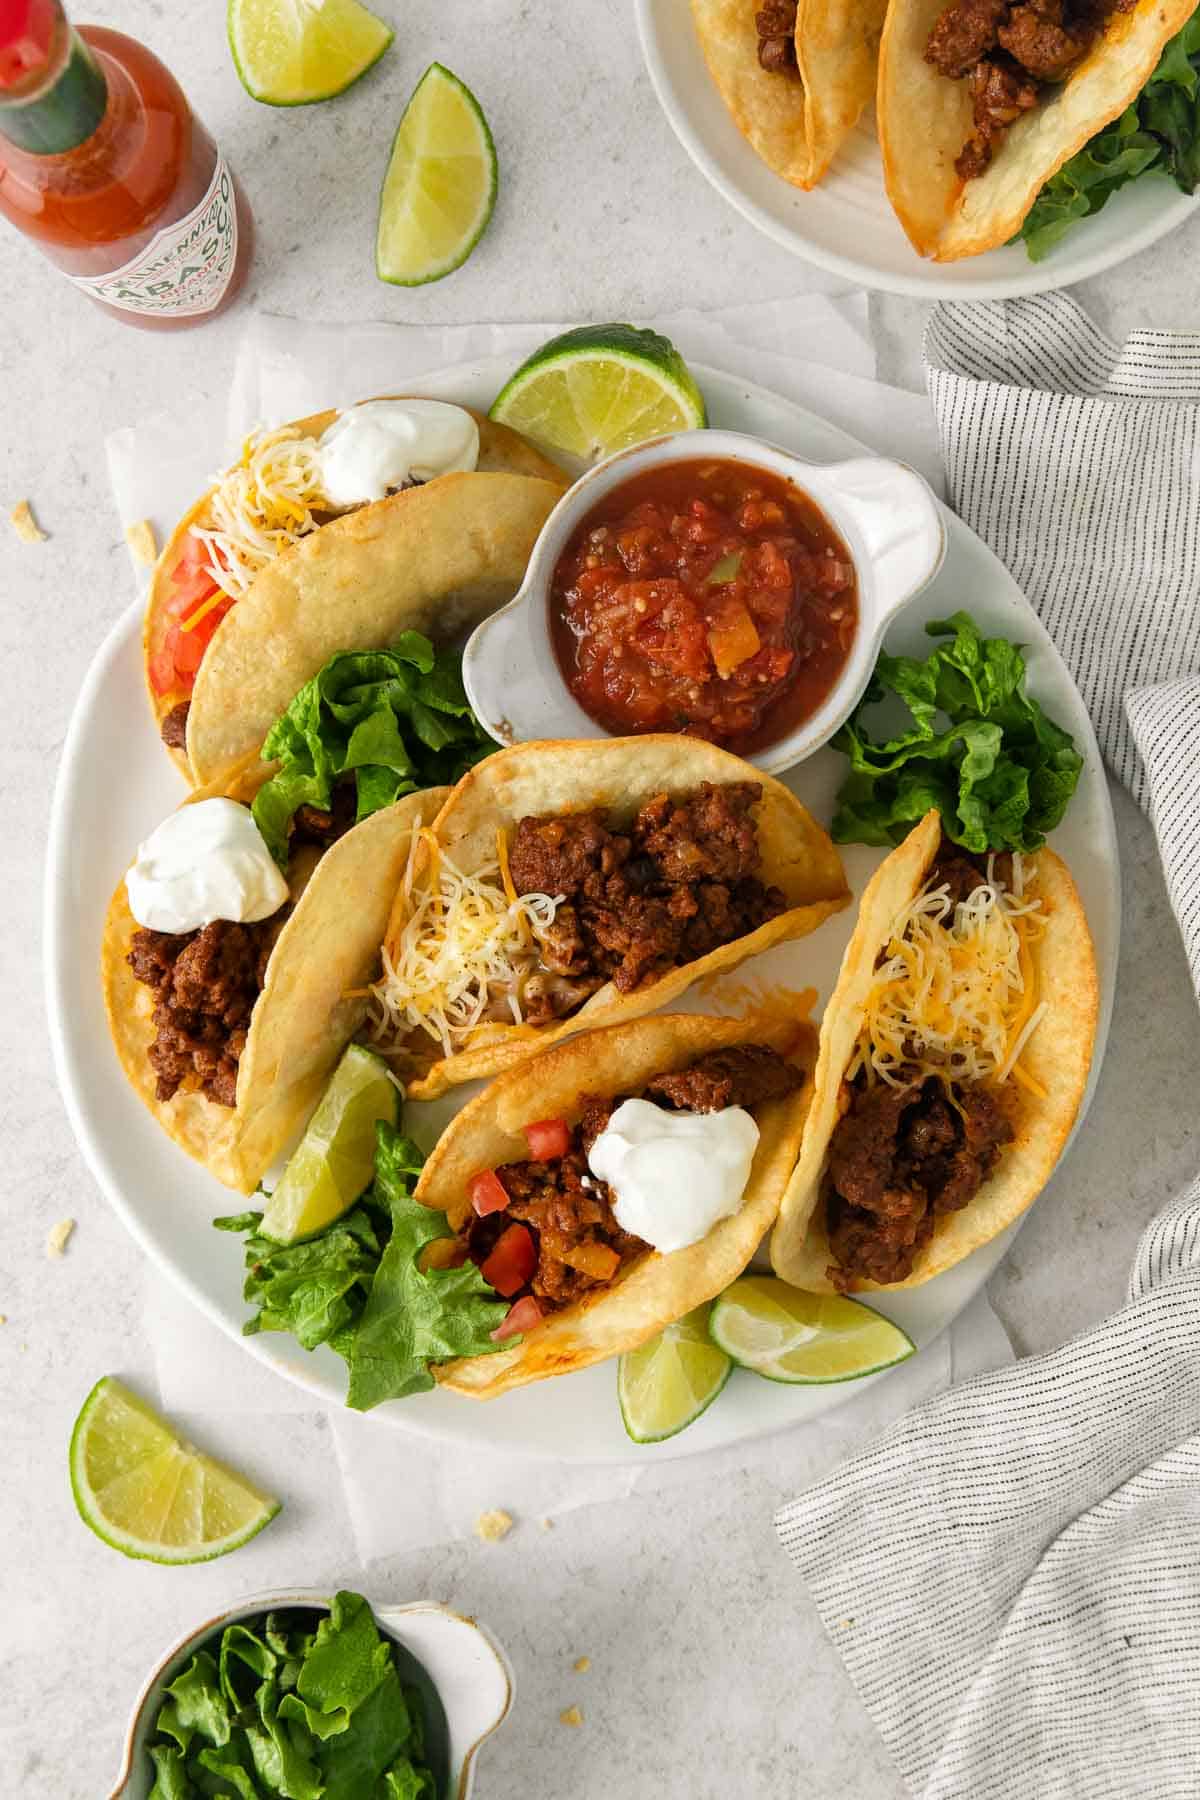 Gluten-free tacos on a plate